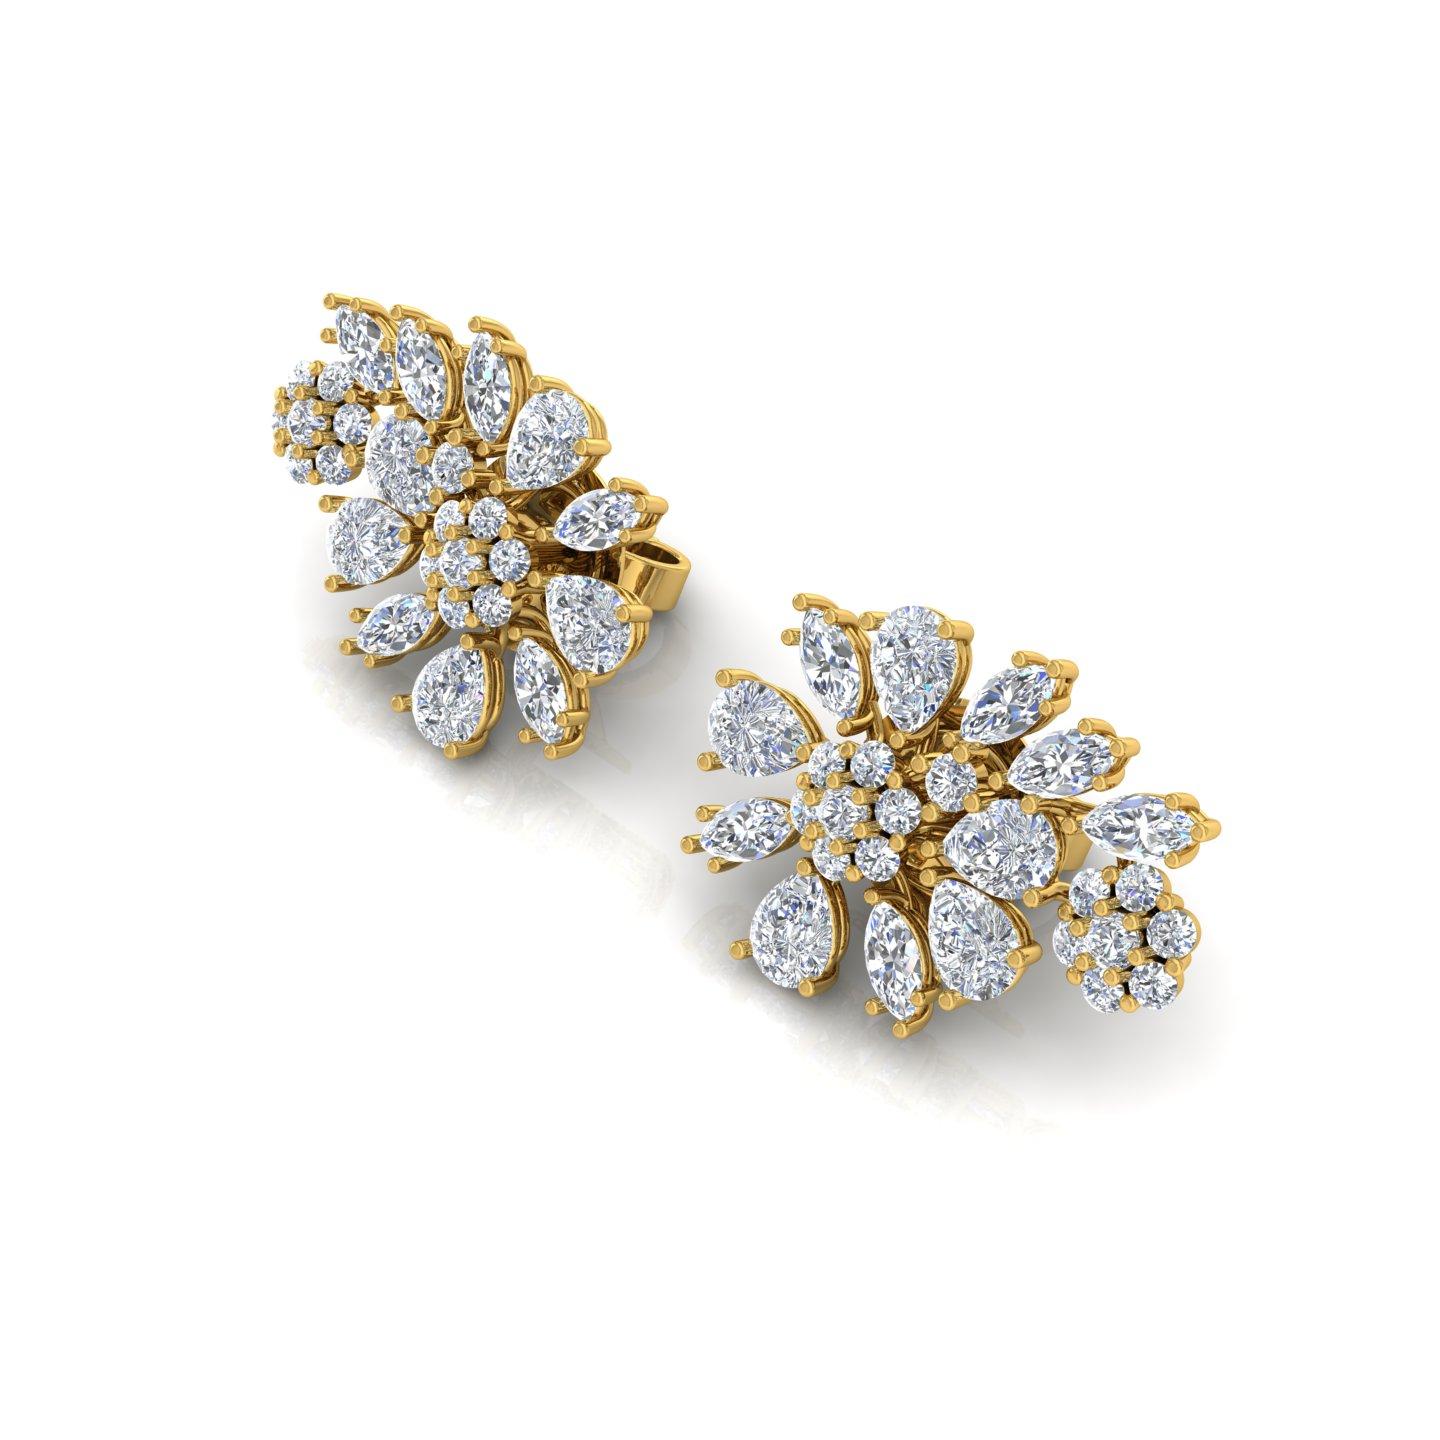 Item Code :- CN-32113
Gross Wt. :- 5.91 gm
18k Yellow Gold Wt. :- 5.37 gm
Diamond Wt. :- 2.70 Ct. ( AVERAGE DIAMOND CLARITY SI1-SI2 & COLOR H-I )
Earrings Size :- 18 x 13 mm approx.

✦ Sizing
.....................
We can adjust most items to fit